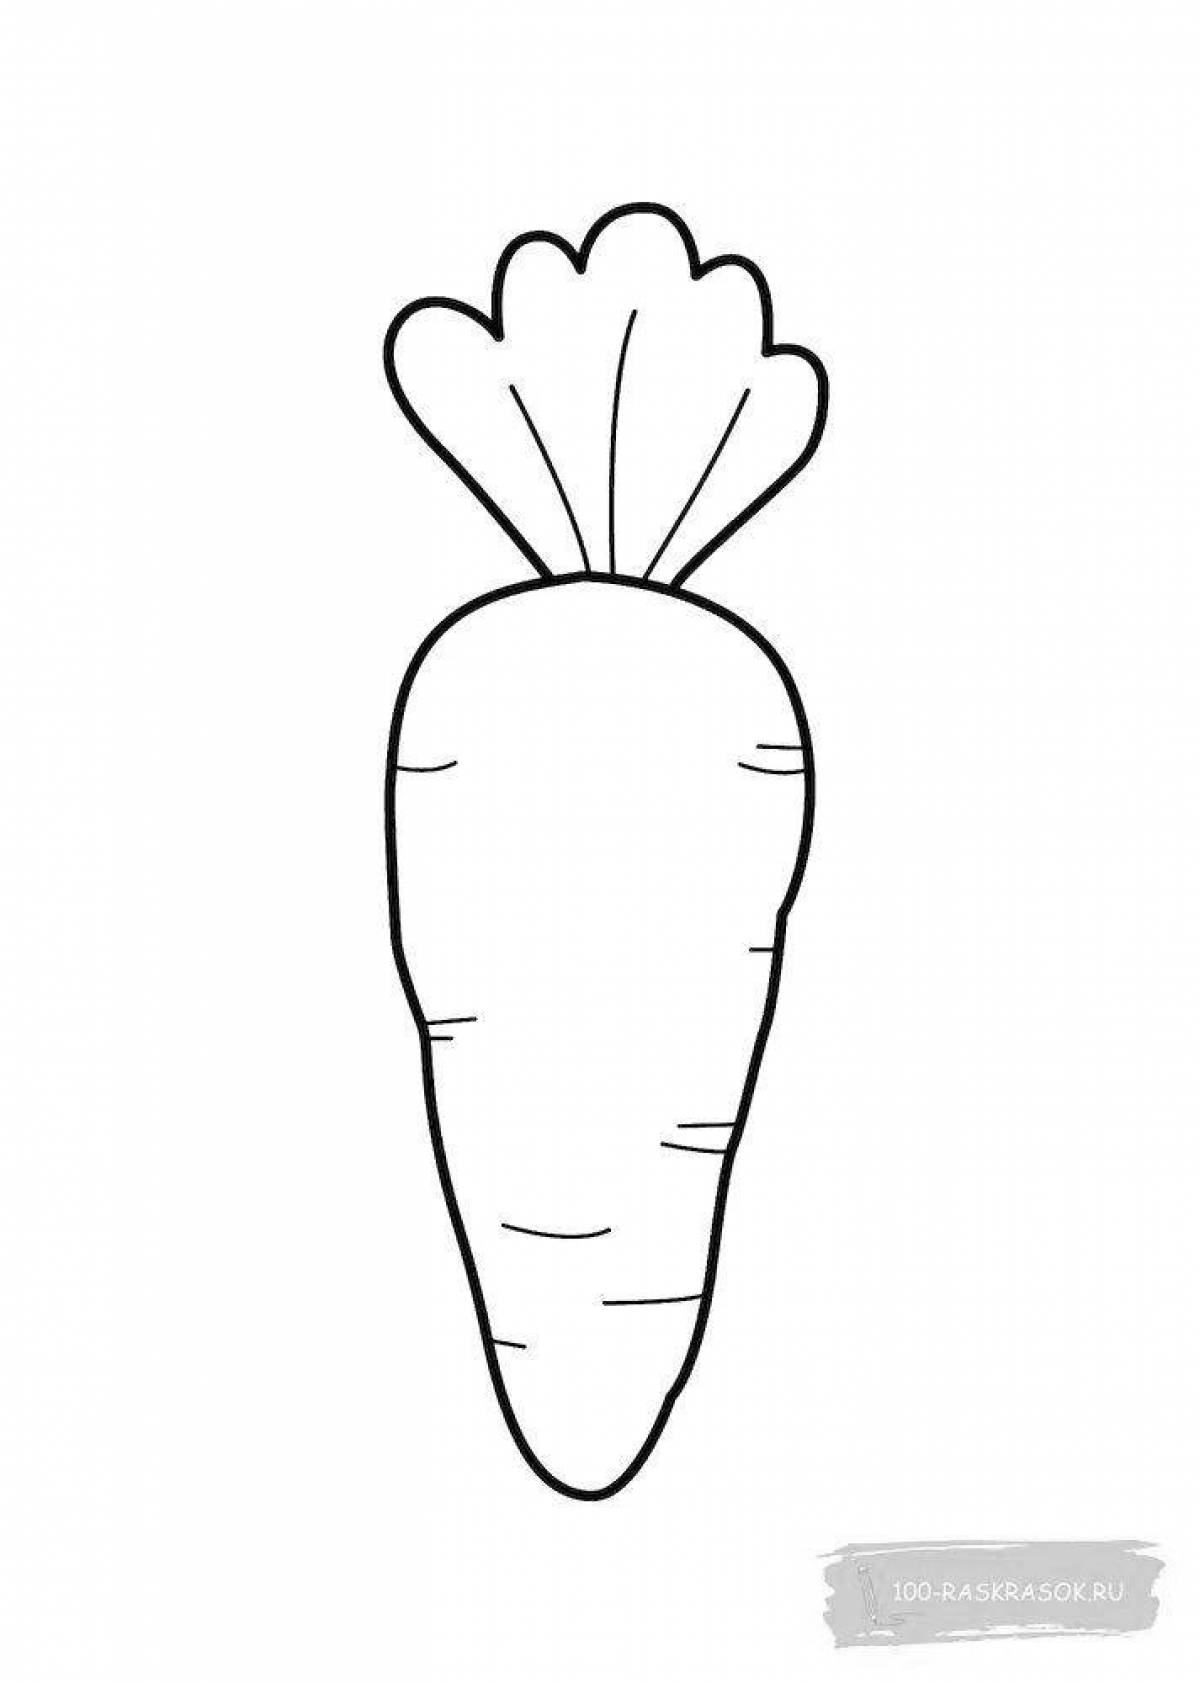 Adorable carrot coloring book for preschoolers 3-4 years old